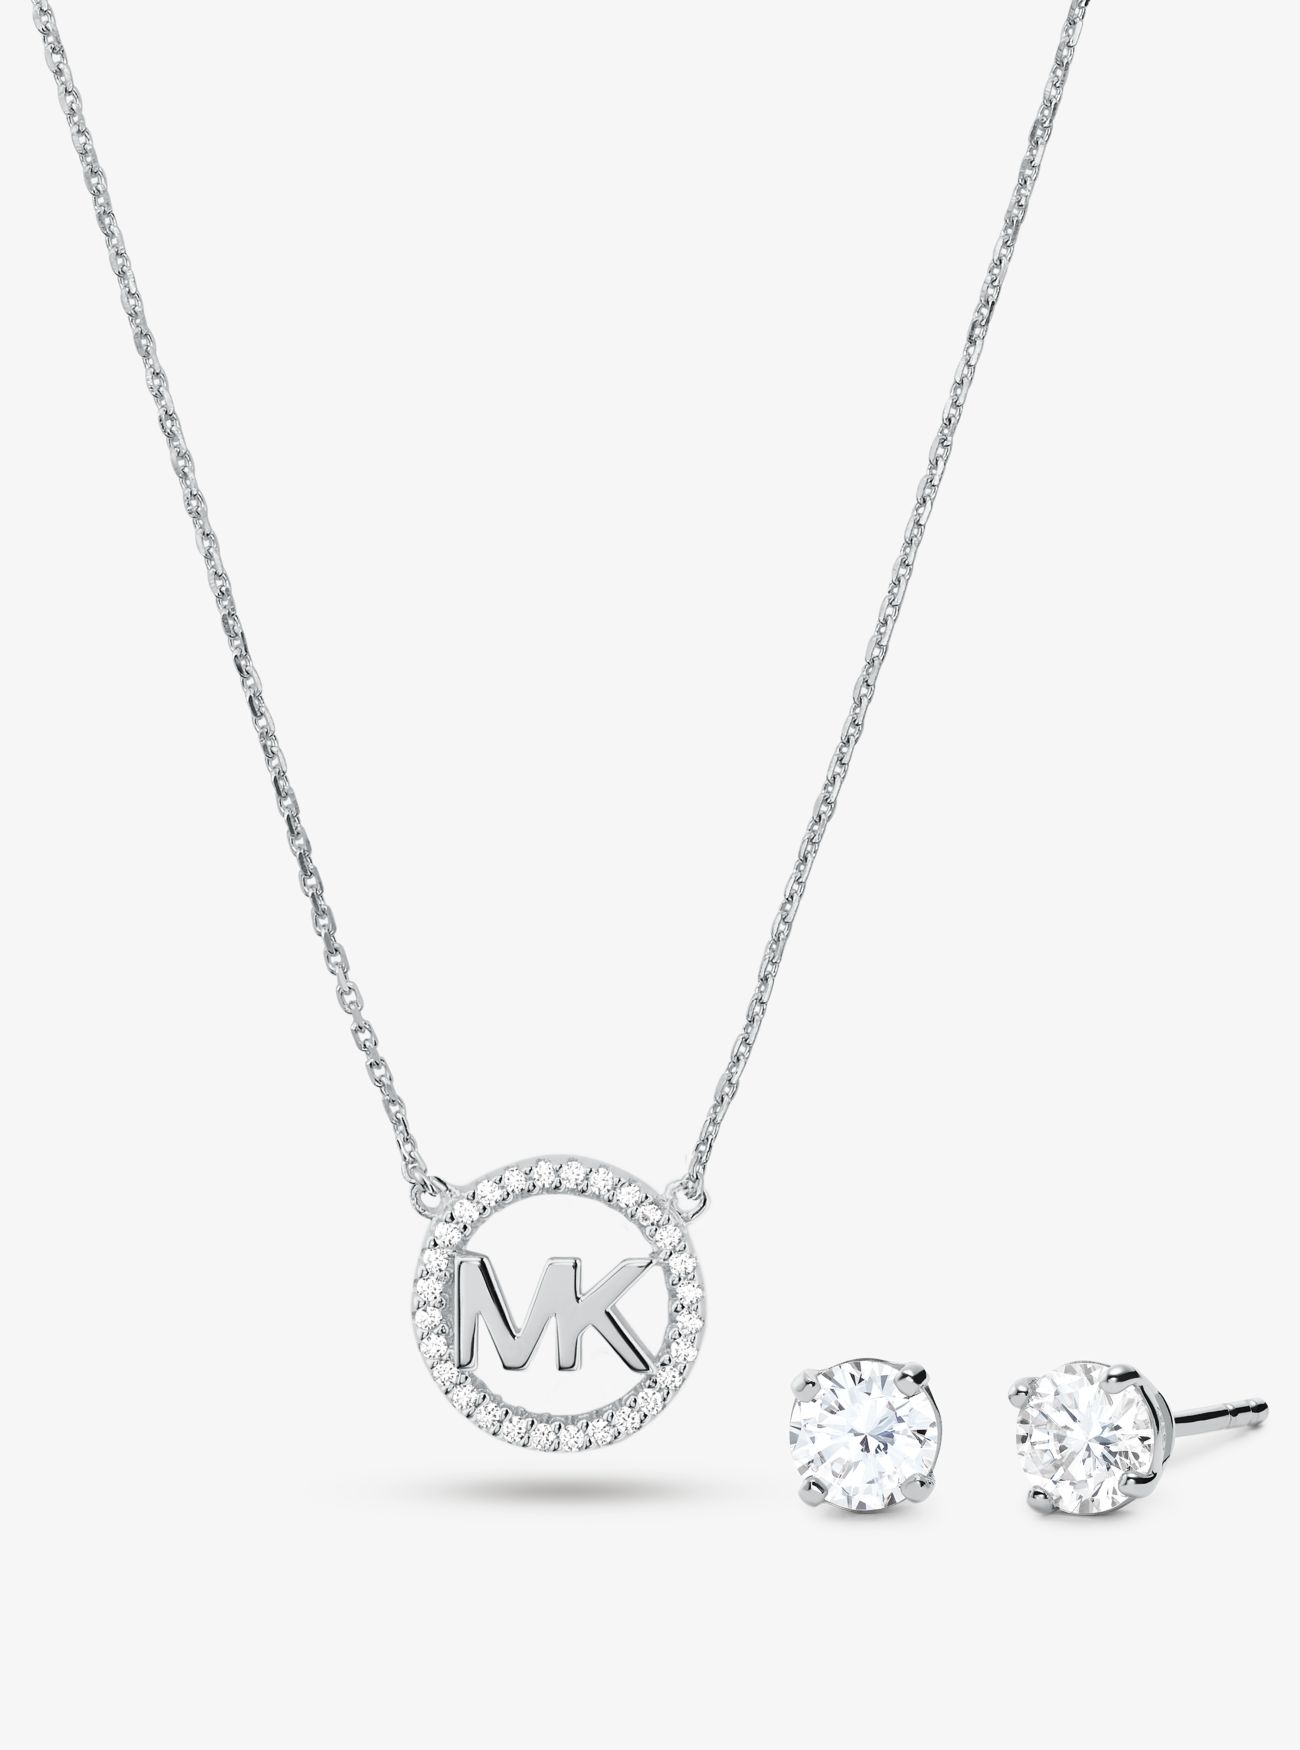 MK 14K Rose Gold-Plated Sterling Silver Pavé Logo Charm Necklace and Stud Earrings Set - Silver - Michael Kors